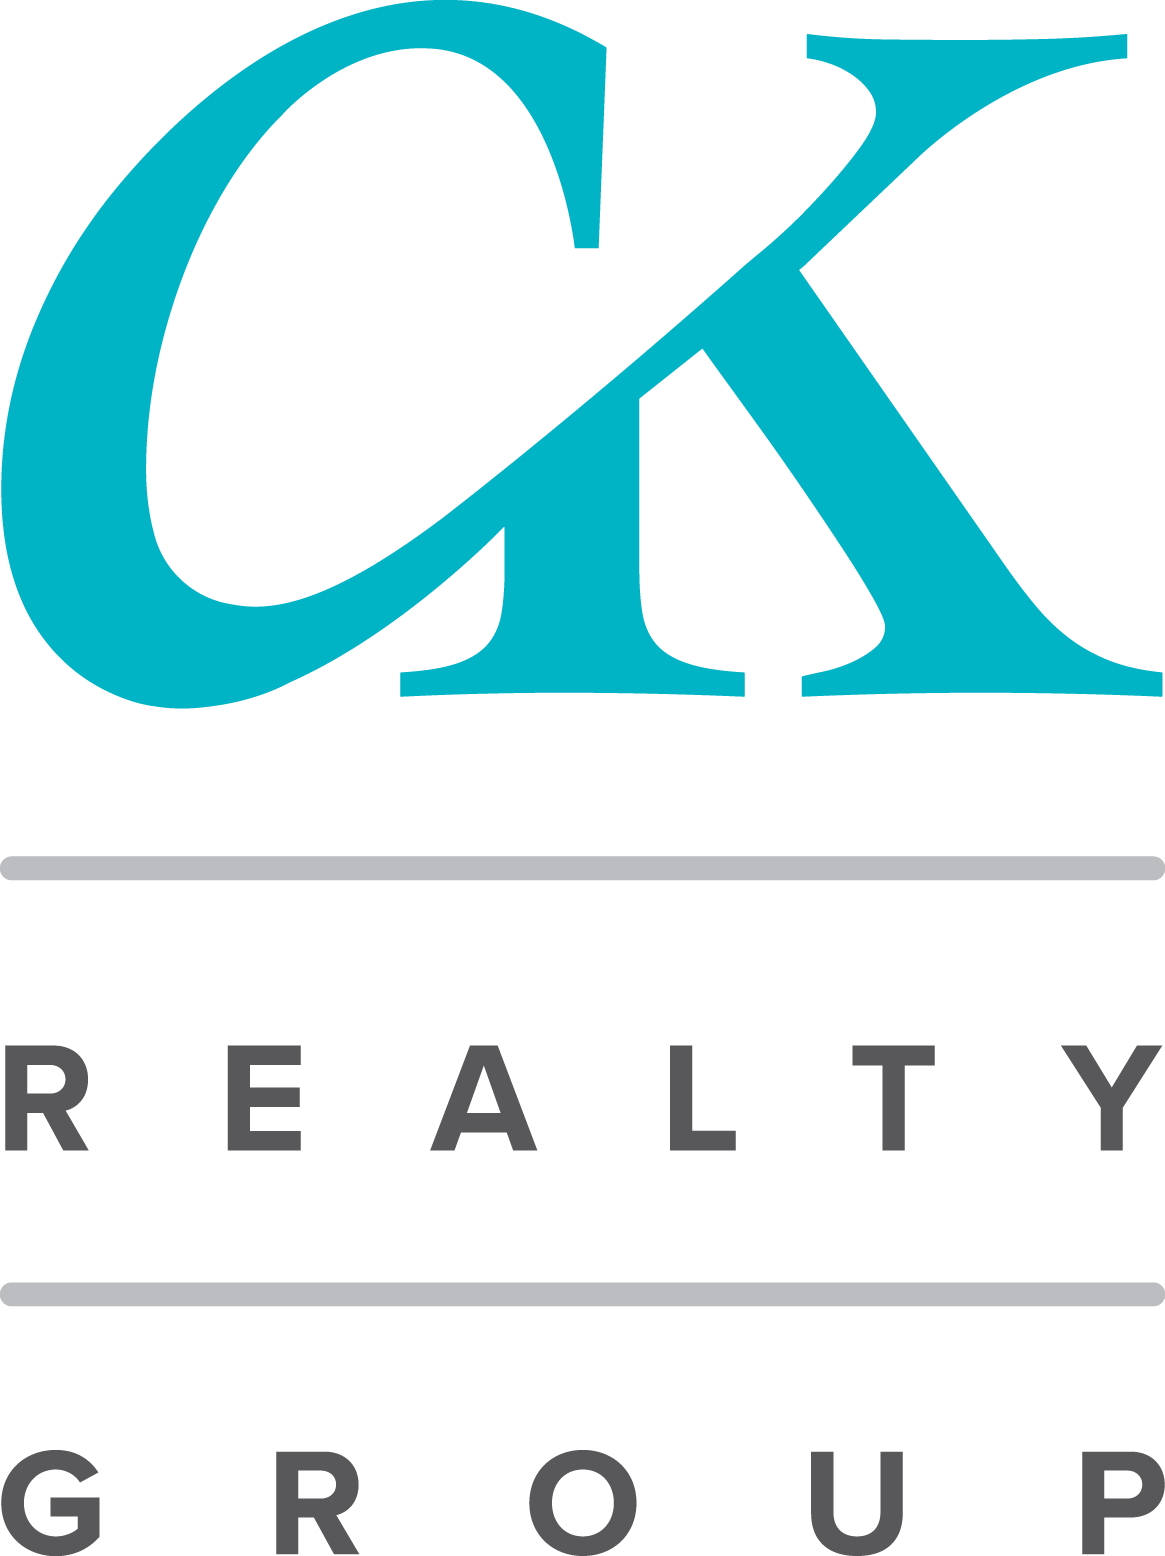  CK Realty uses Robert Miller Photography for their real estate photography in Northern Virginia 